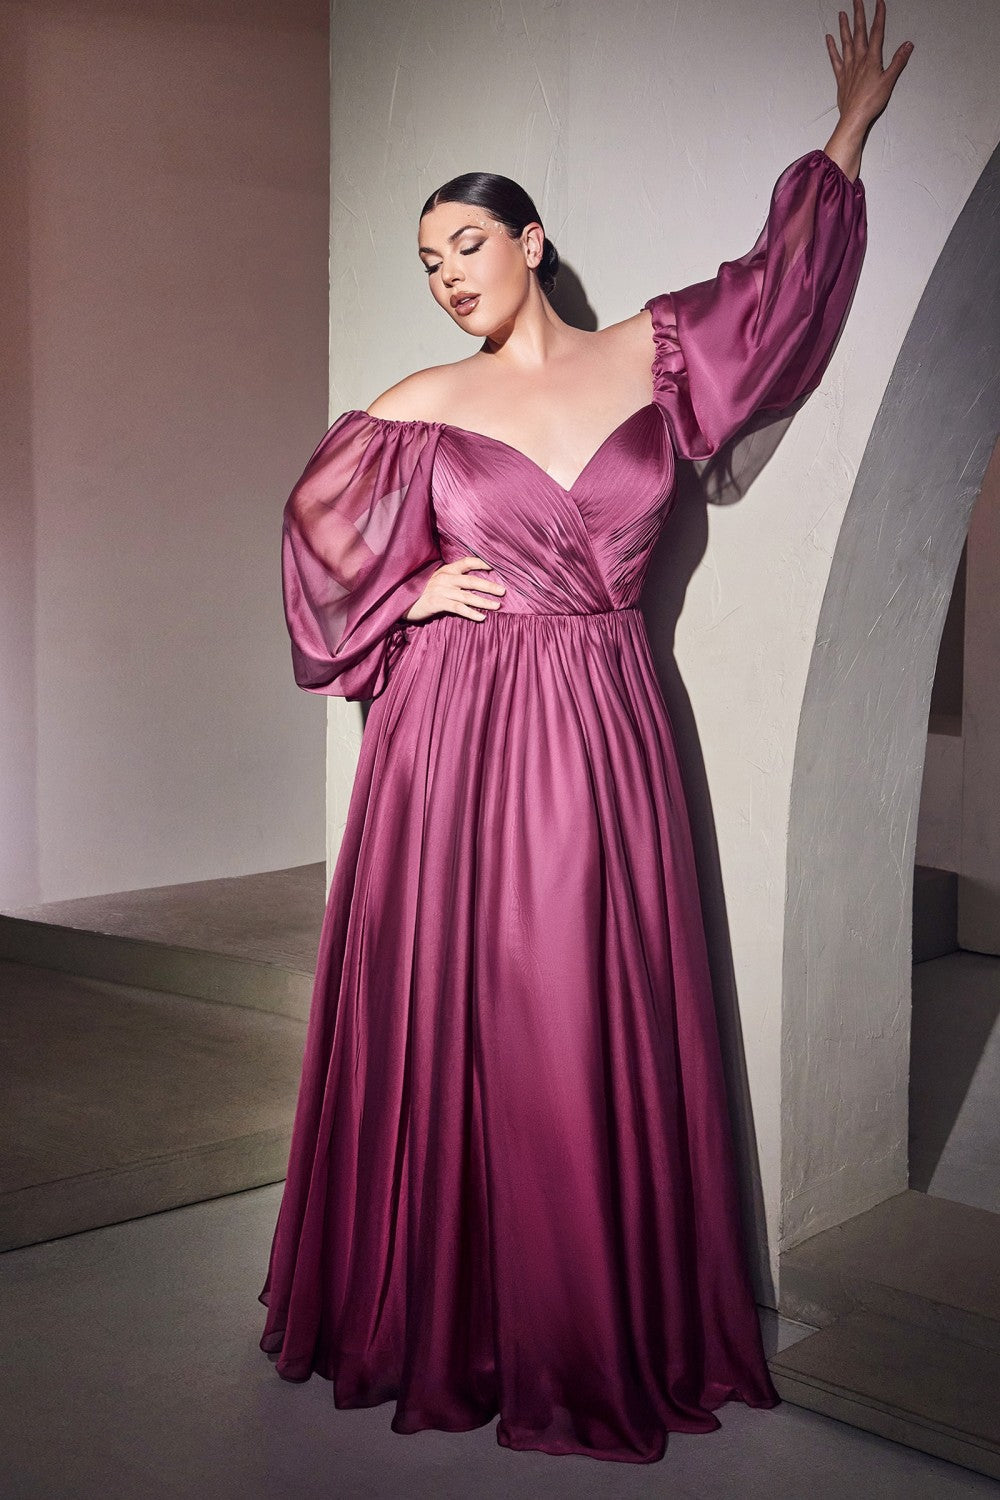 Classic Evening & Prom Dresses Long Sleeves Bodice A-line Chiffon Gown Plus Size Luxury Royal Style CDCD243C